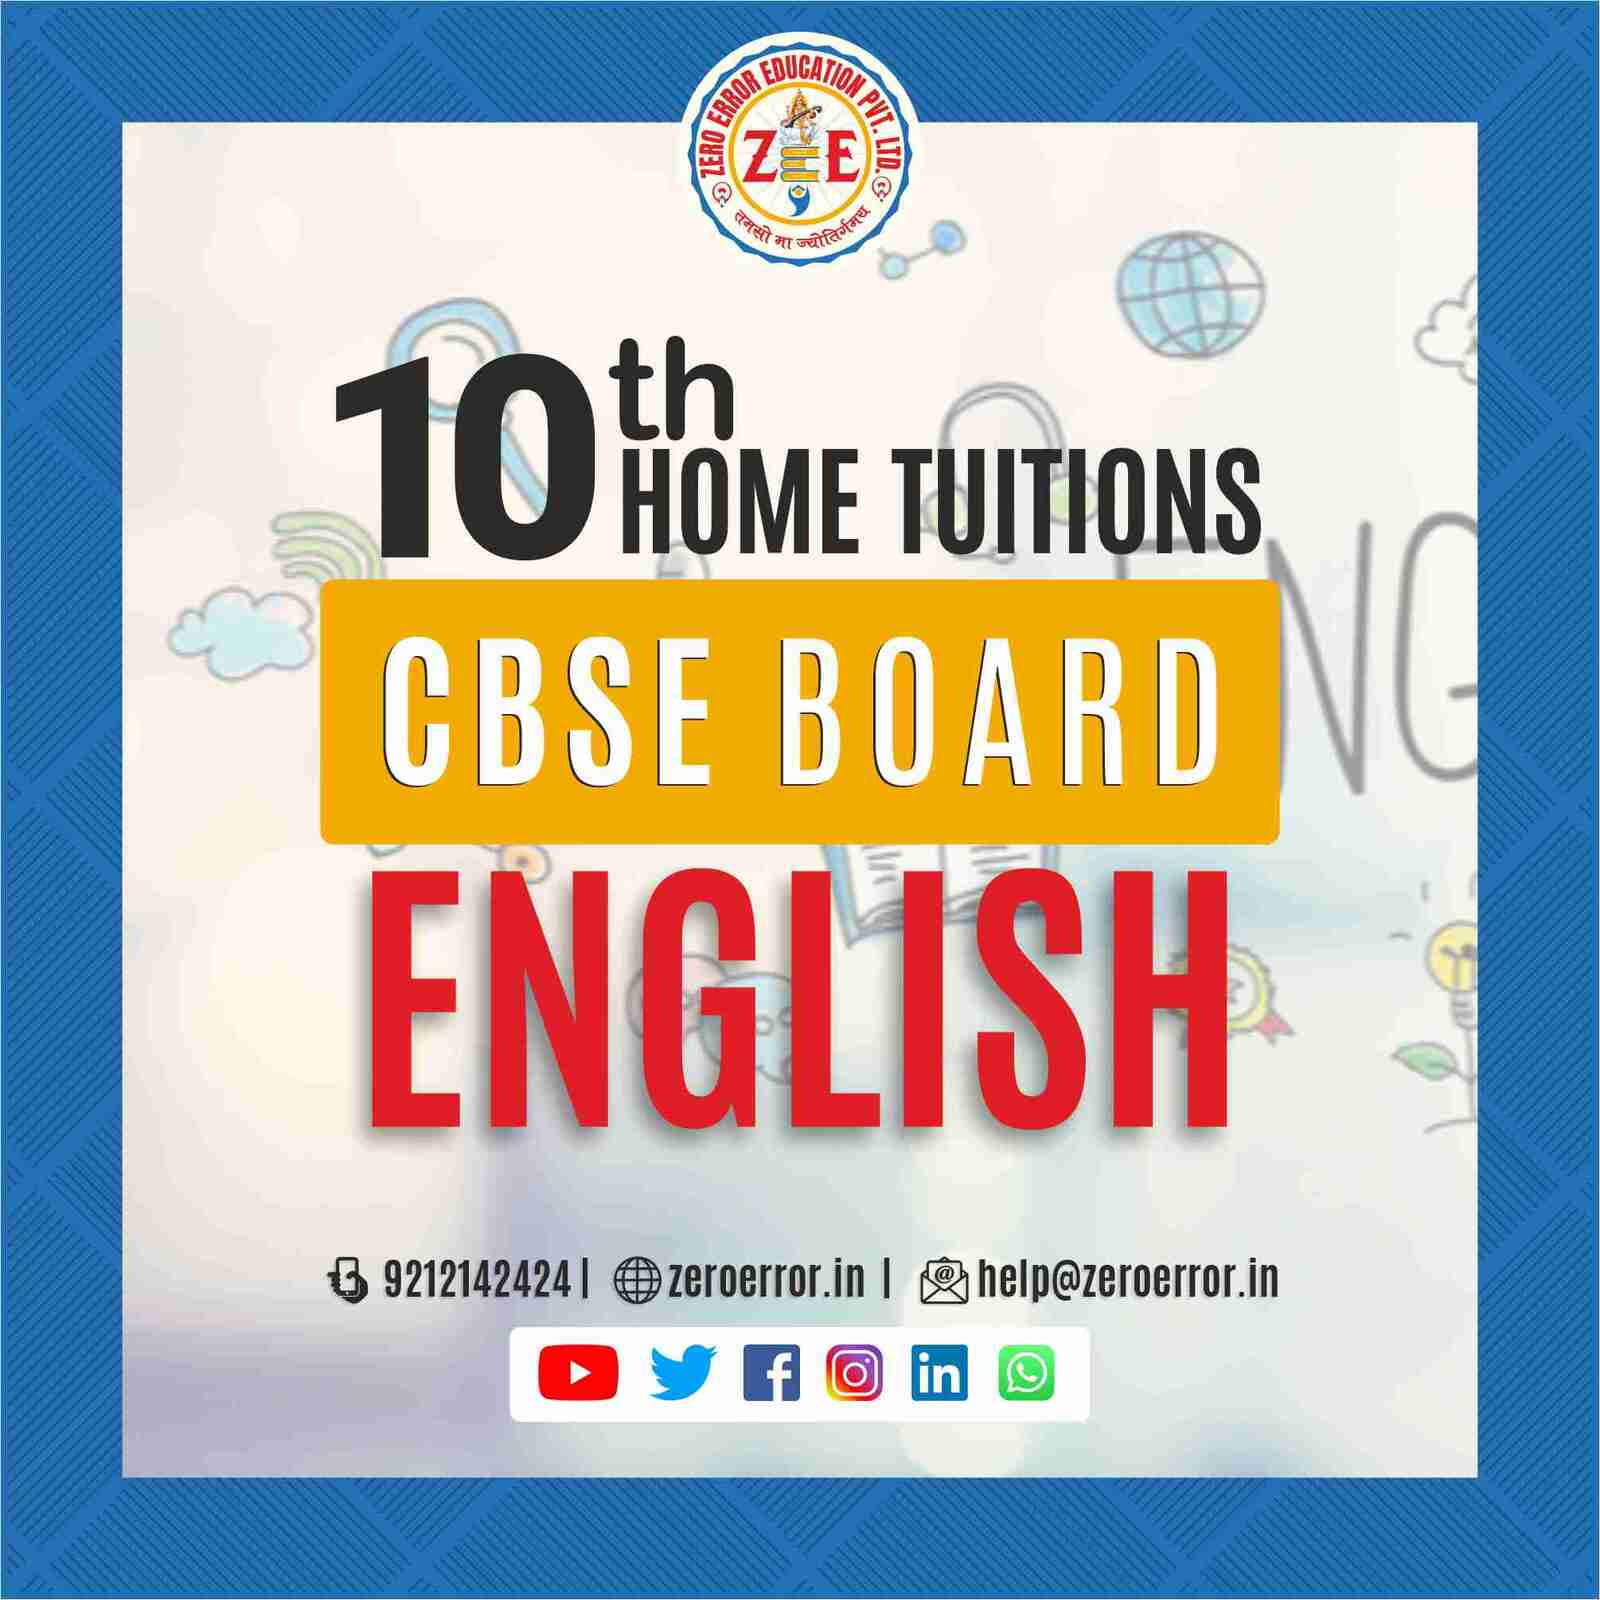 10th Grade CBSE English Online Classes by Zero Error Education Prepare for your CBSE board exams with online and offline English classes for 10th grade. Learn from experienced home tutors and get all the help you need to succeed. Enroll today at Zero Error Education. [https://zeroerror.in/] Call 9212142424 for more information.